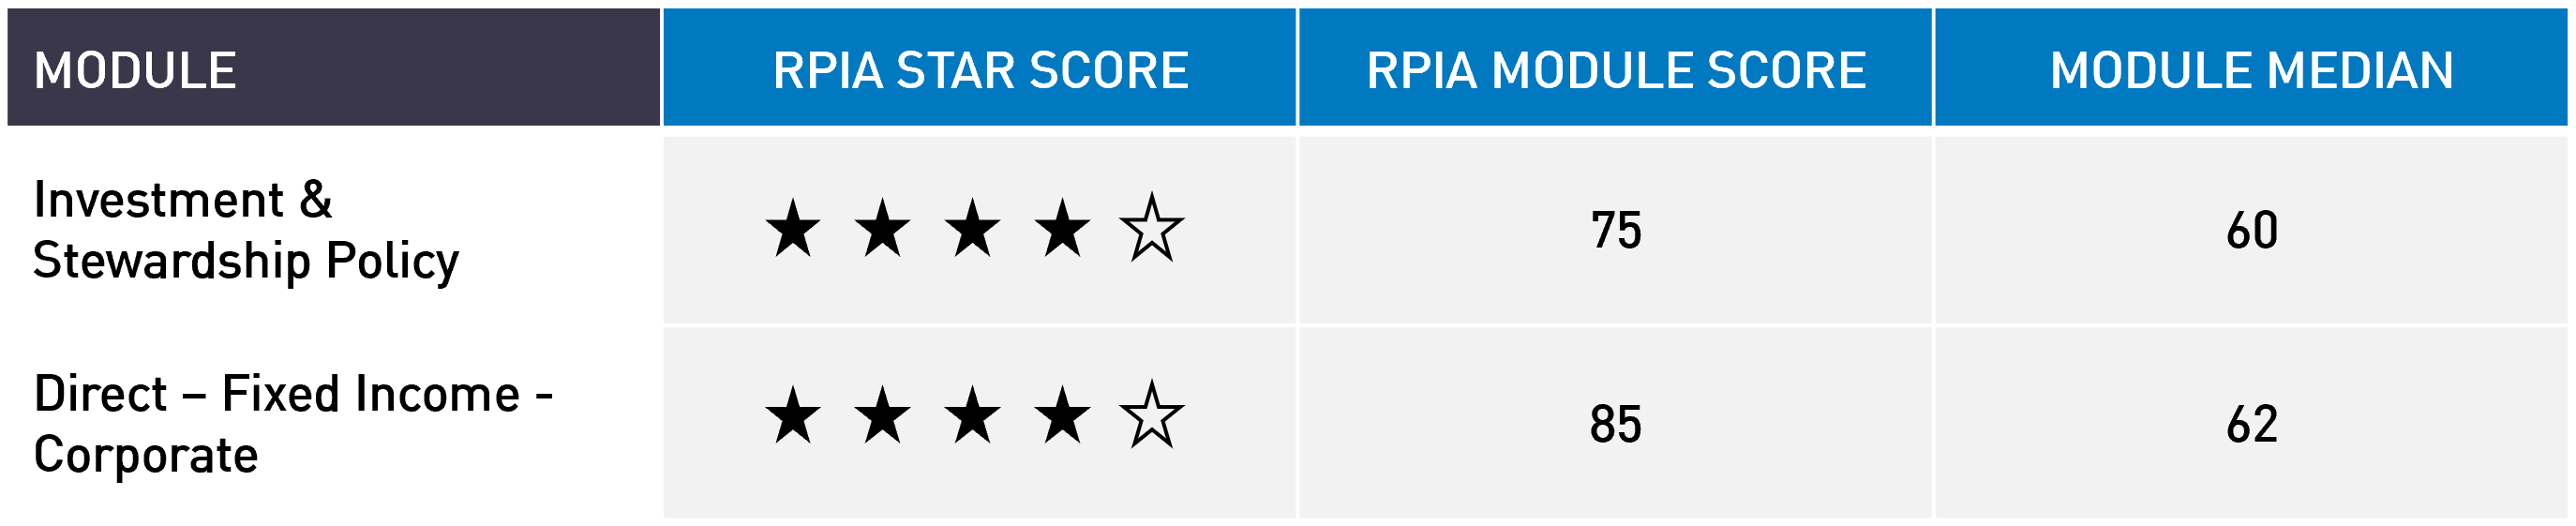 RPIA received four out of five stars in both the Investment & Stewardship Policy and Direct – Fixed Income - Corporate modules, earning scores higher than the median.